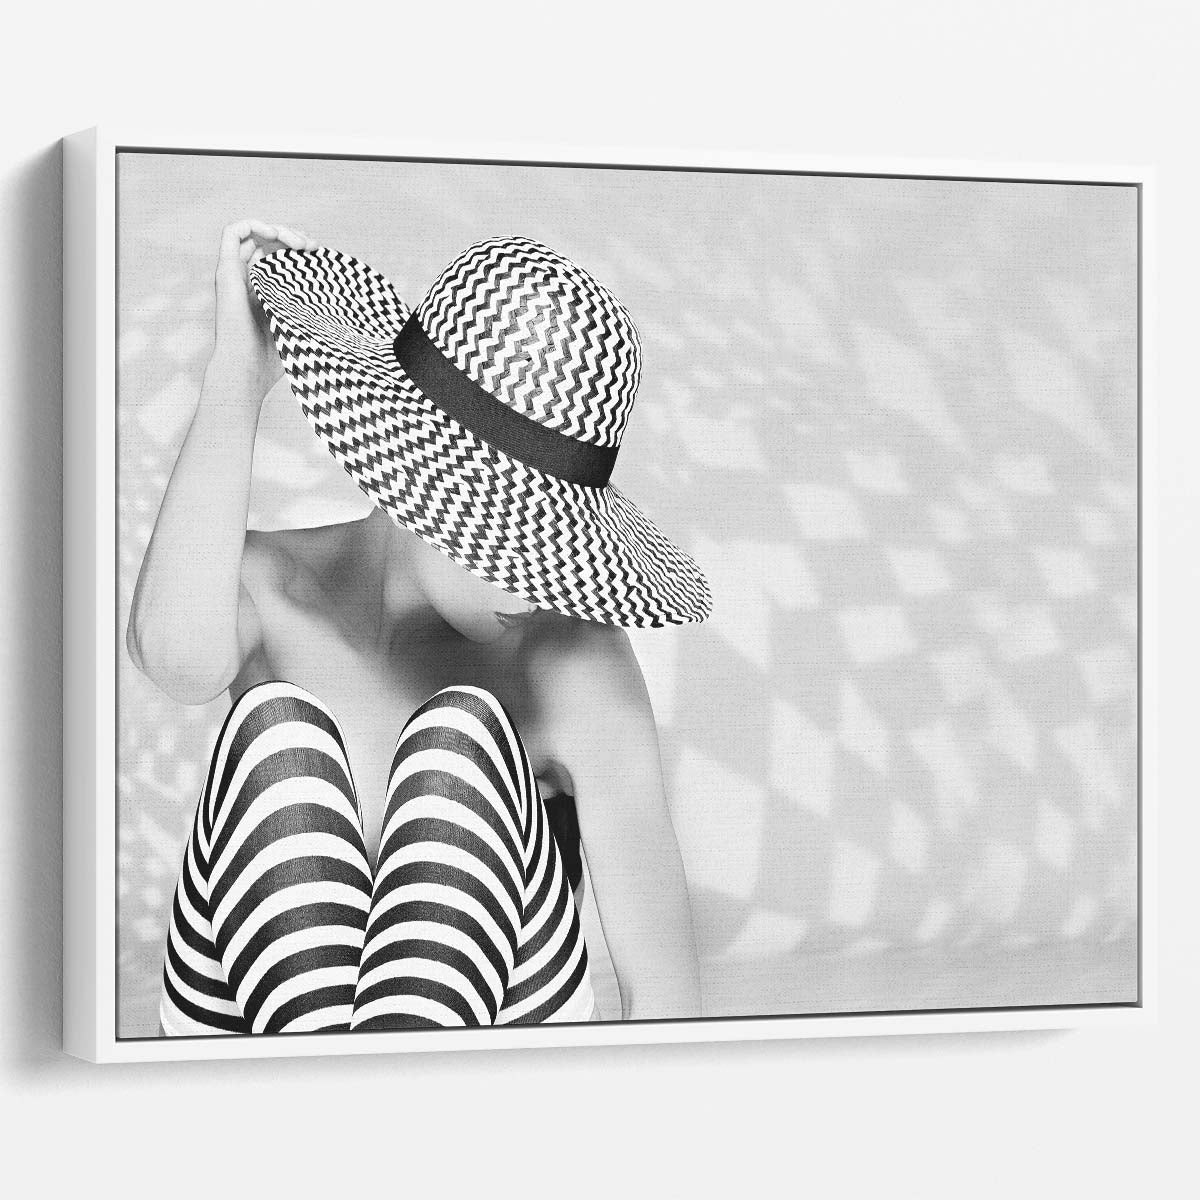 Monochrome ZebraPatterned Woman Portrait Wall Art by Luxuriance Designs. Made in USA.